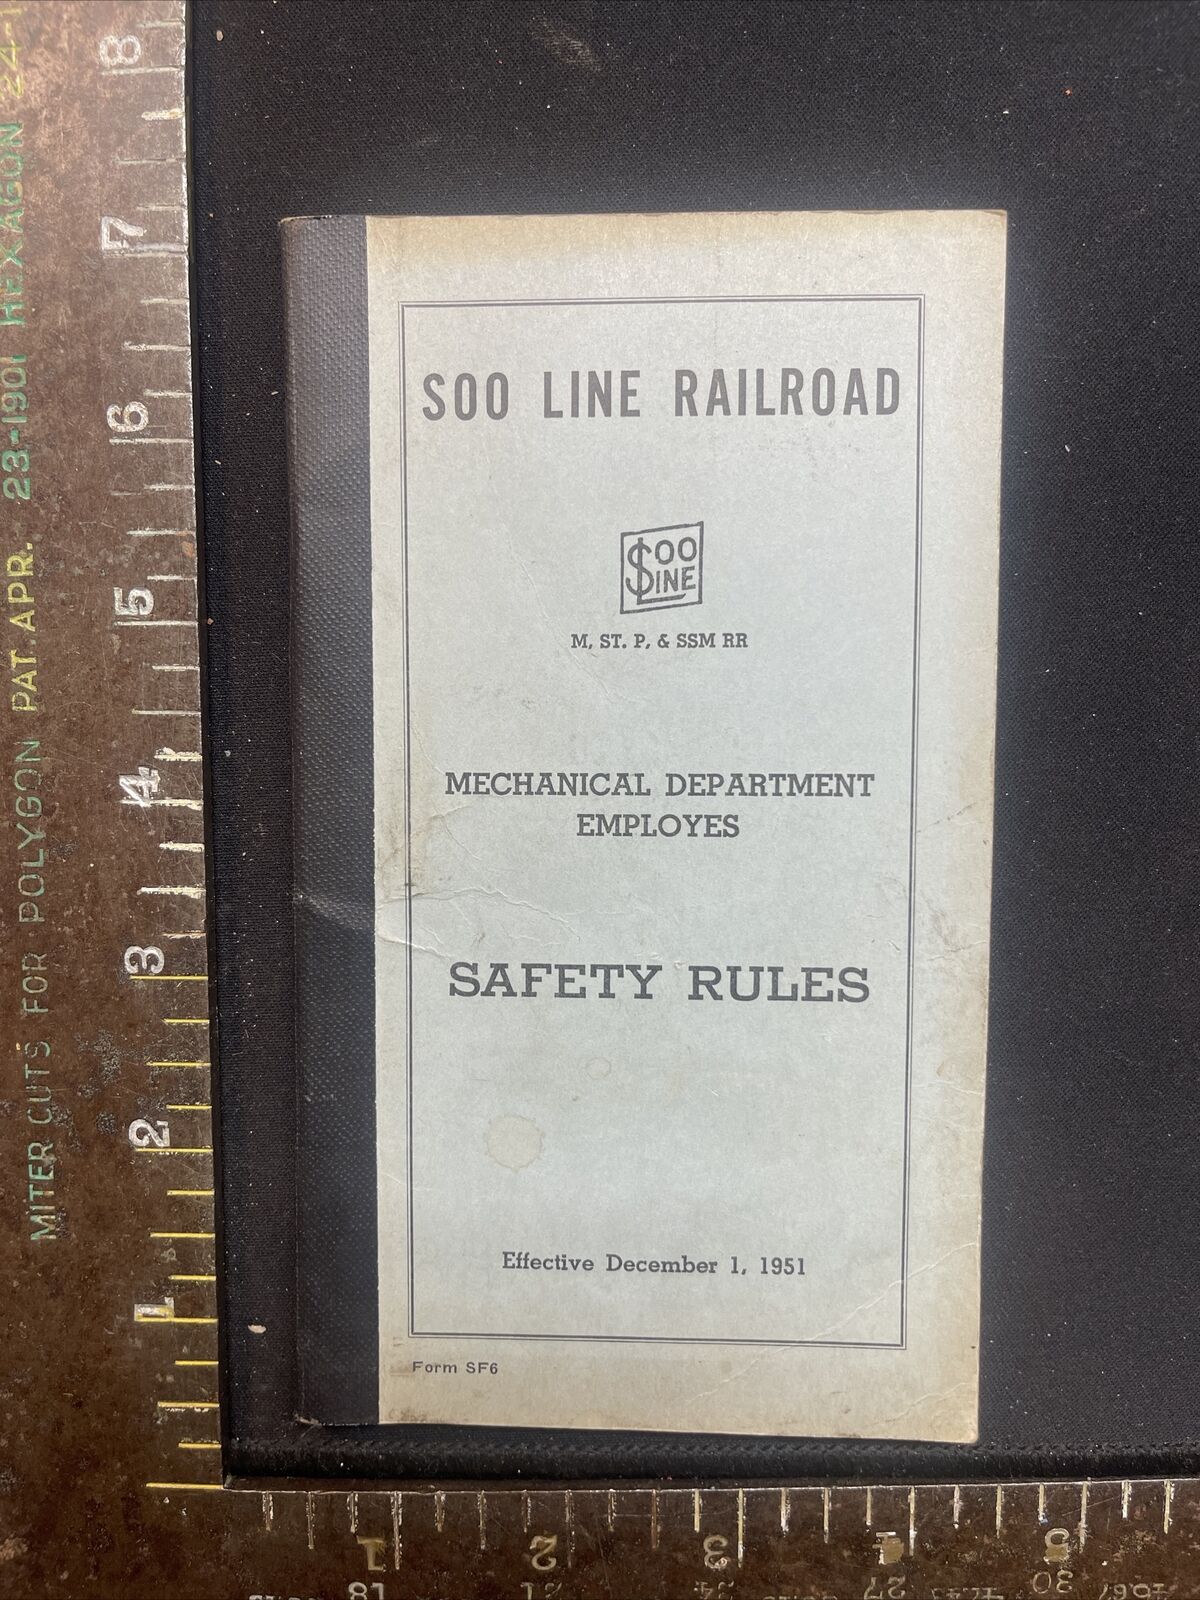 Vintage 1951 Soo Line railroad mechanical department, employees, safety rules